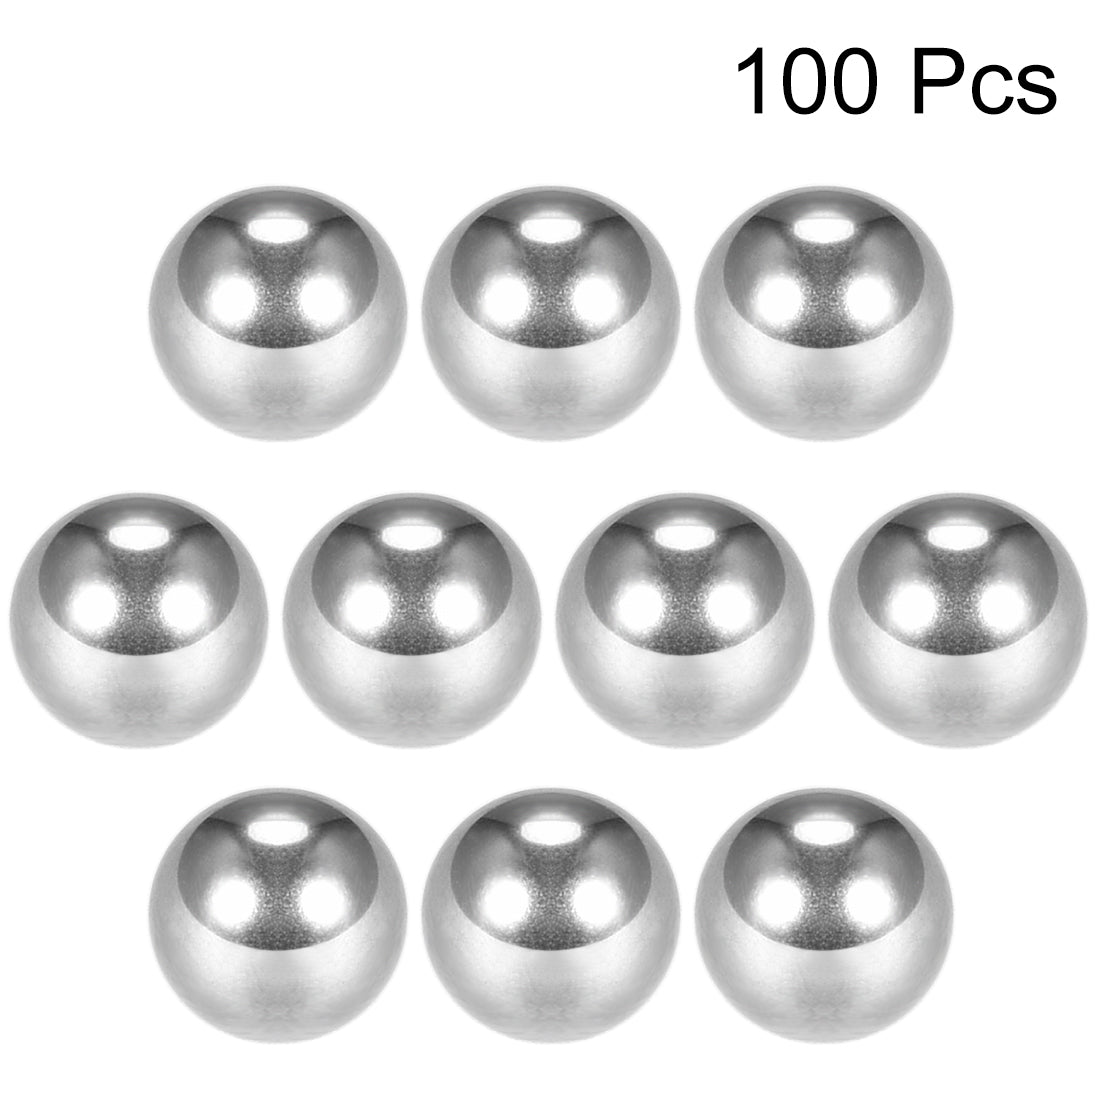 uxcell Uxcell Precision Balls 3/8" Solid Chrome Steel G25 for Ball Bearing Wheel 100pcs